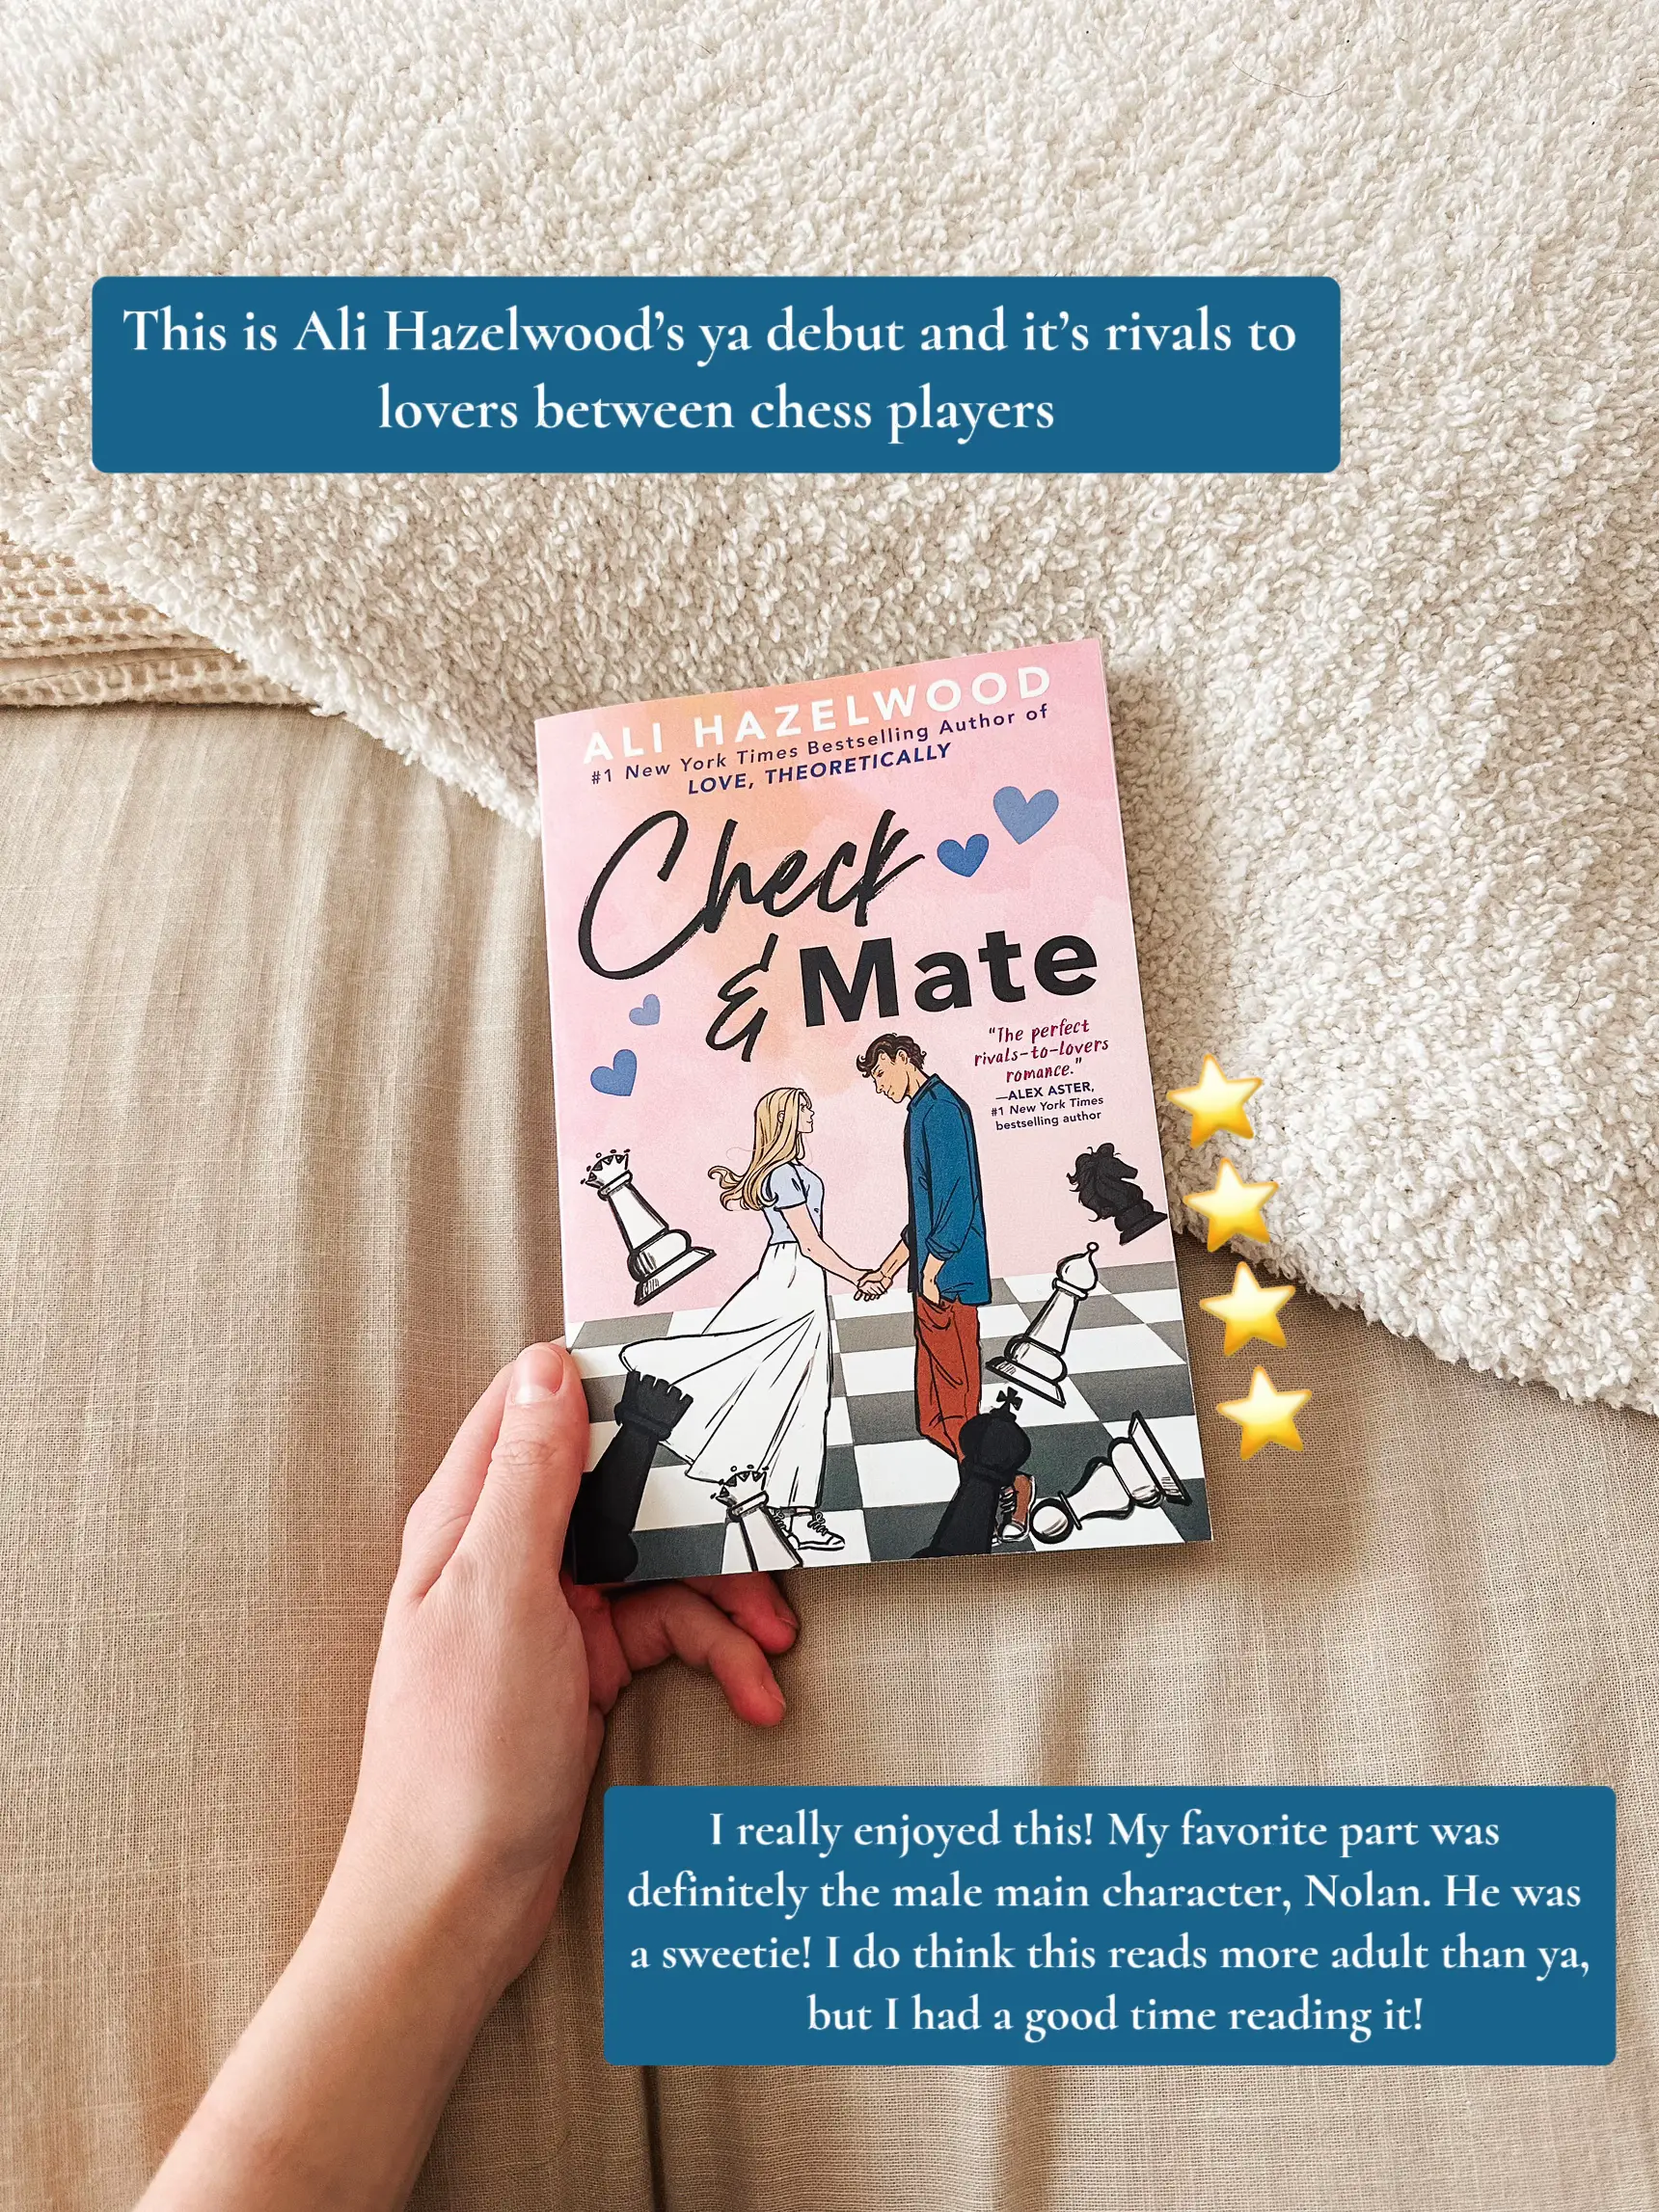 Check & Mate by Ali Hazelwood. - Beware Of The Reader